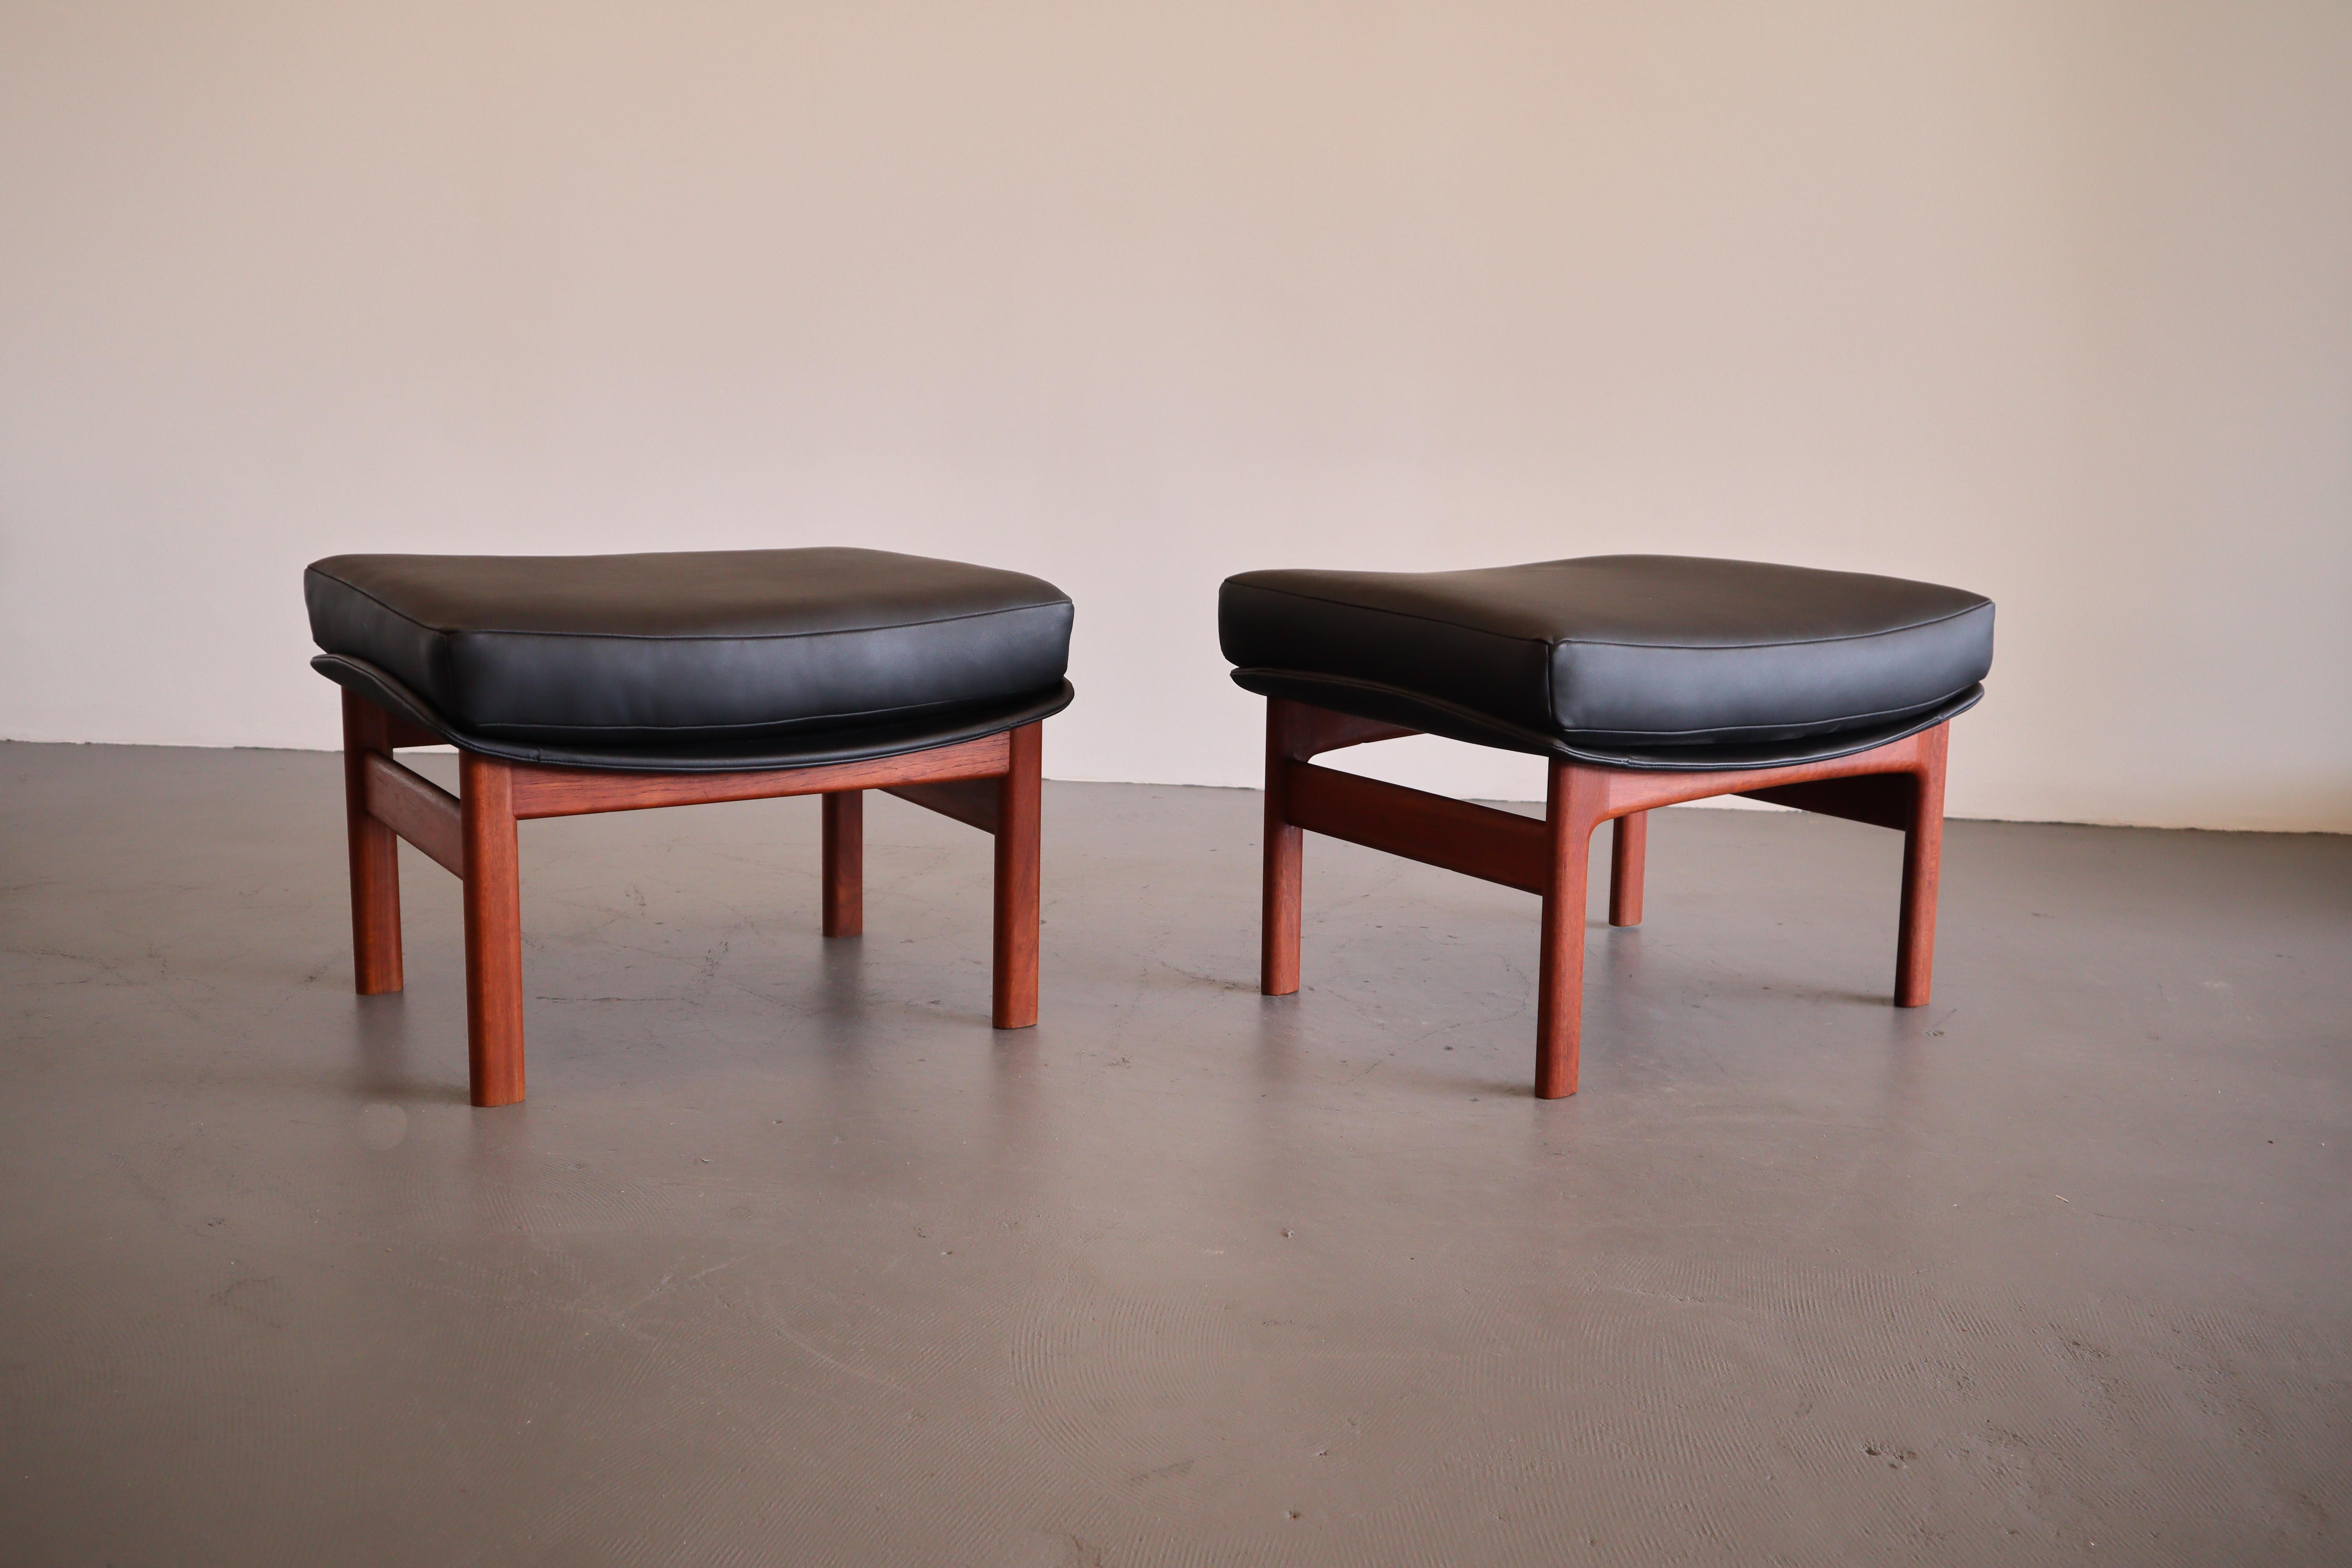 Minimalist and organic, Larsen's design ethos incorporated functionality and high quality materials. An exceptional pair of midnight black leather ottomans for Mogens Kold Møbelfabrick. The upholstery compliments the robust teak base and pleasant